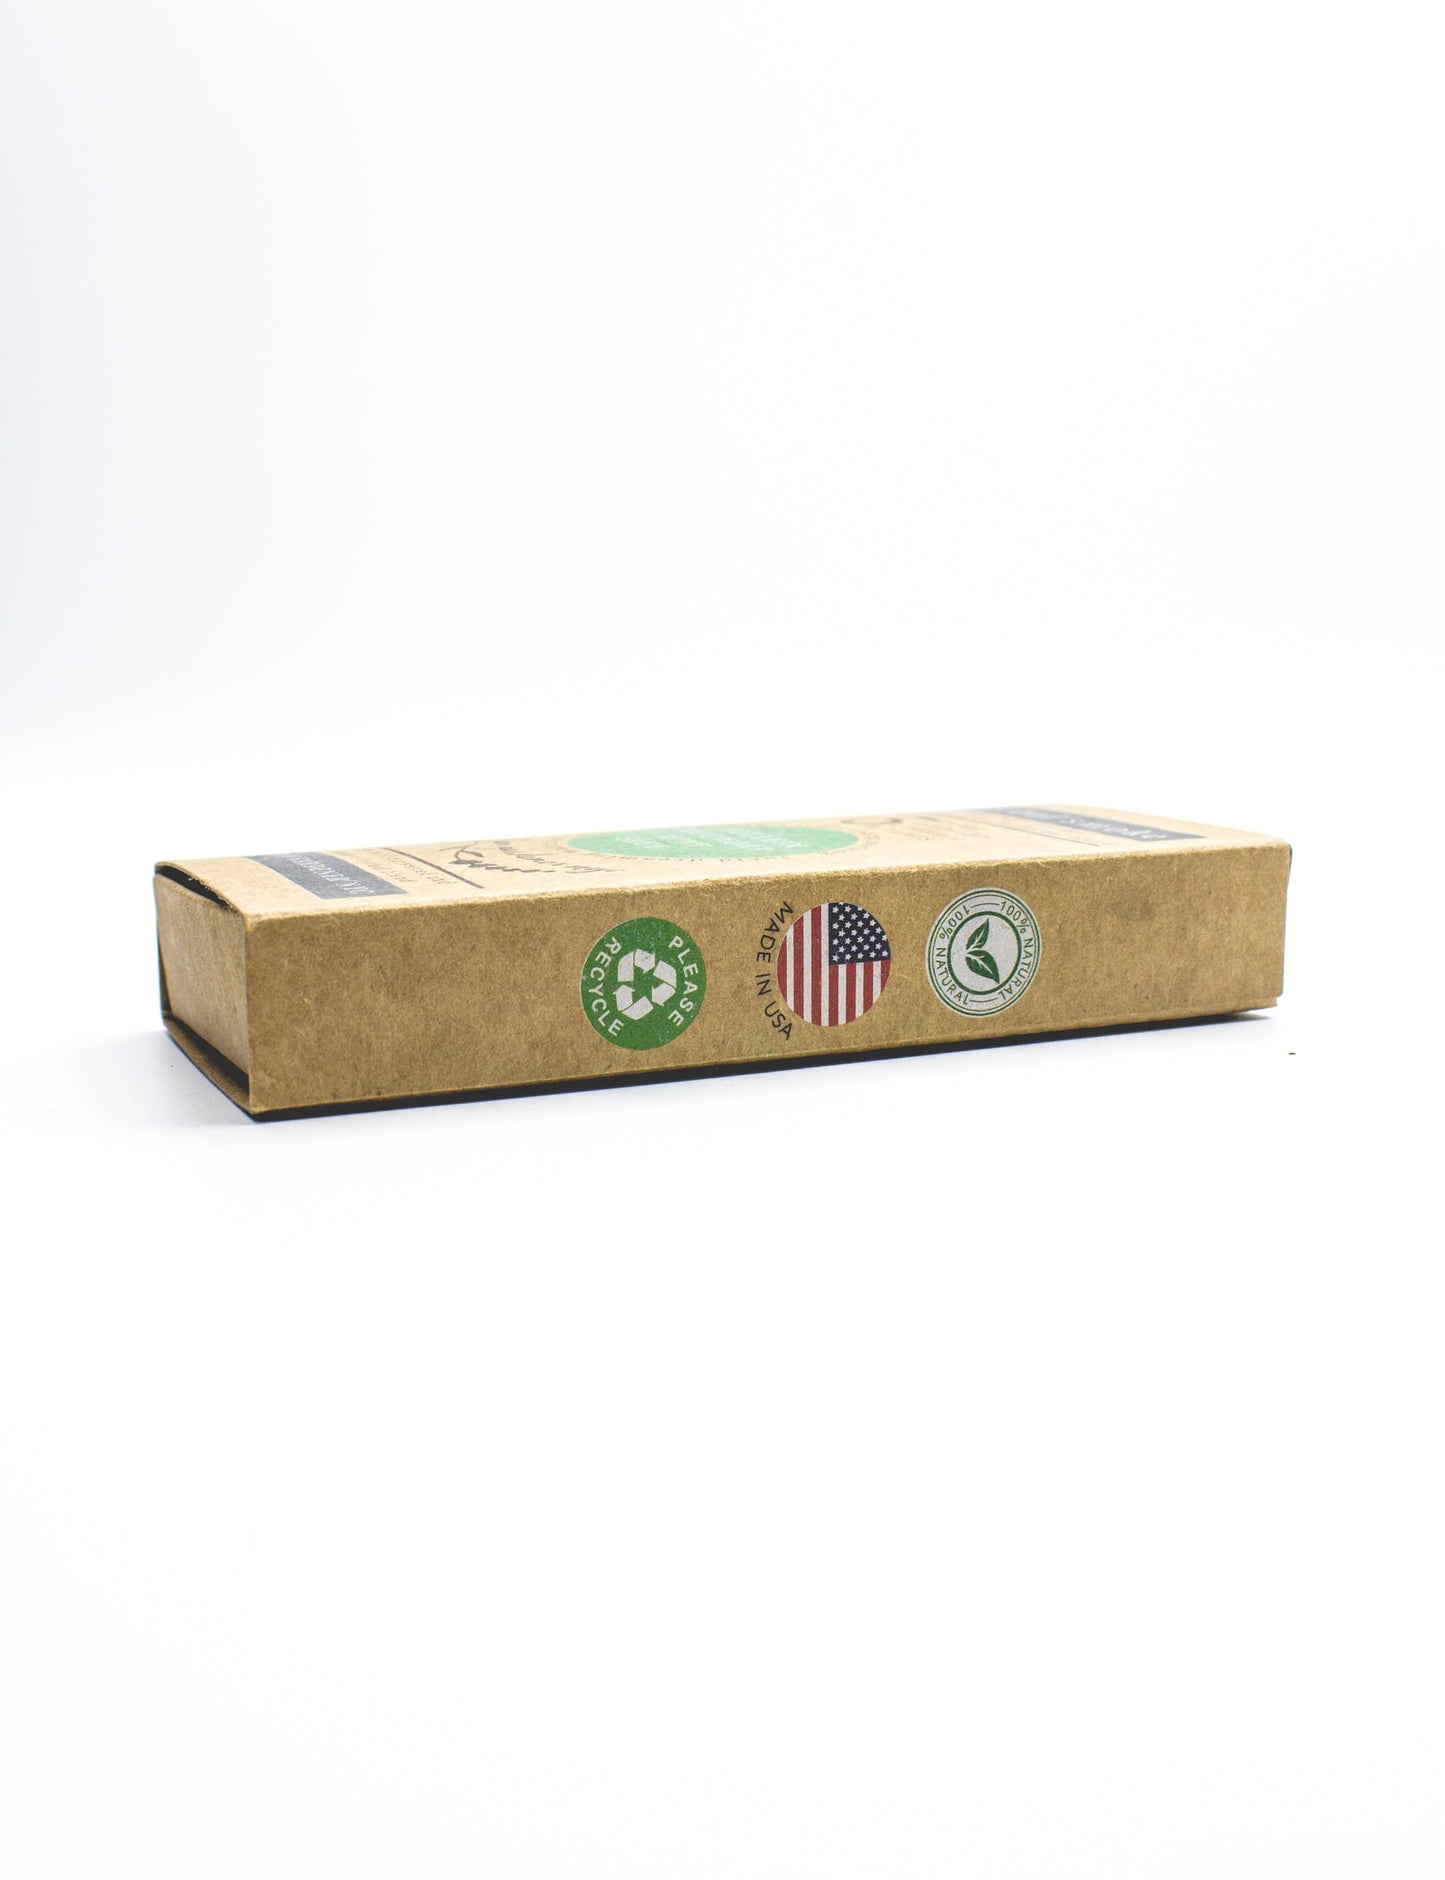 Herbal pre-rolls for smoking with wild-harvested mullein, wild-harvested mugwort, organic mint, and organic sage designed for calming, sweet dreams, and relaxation